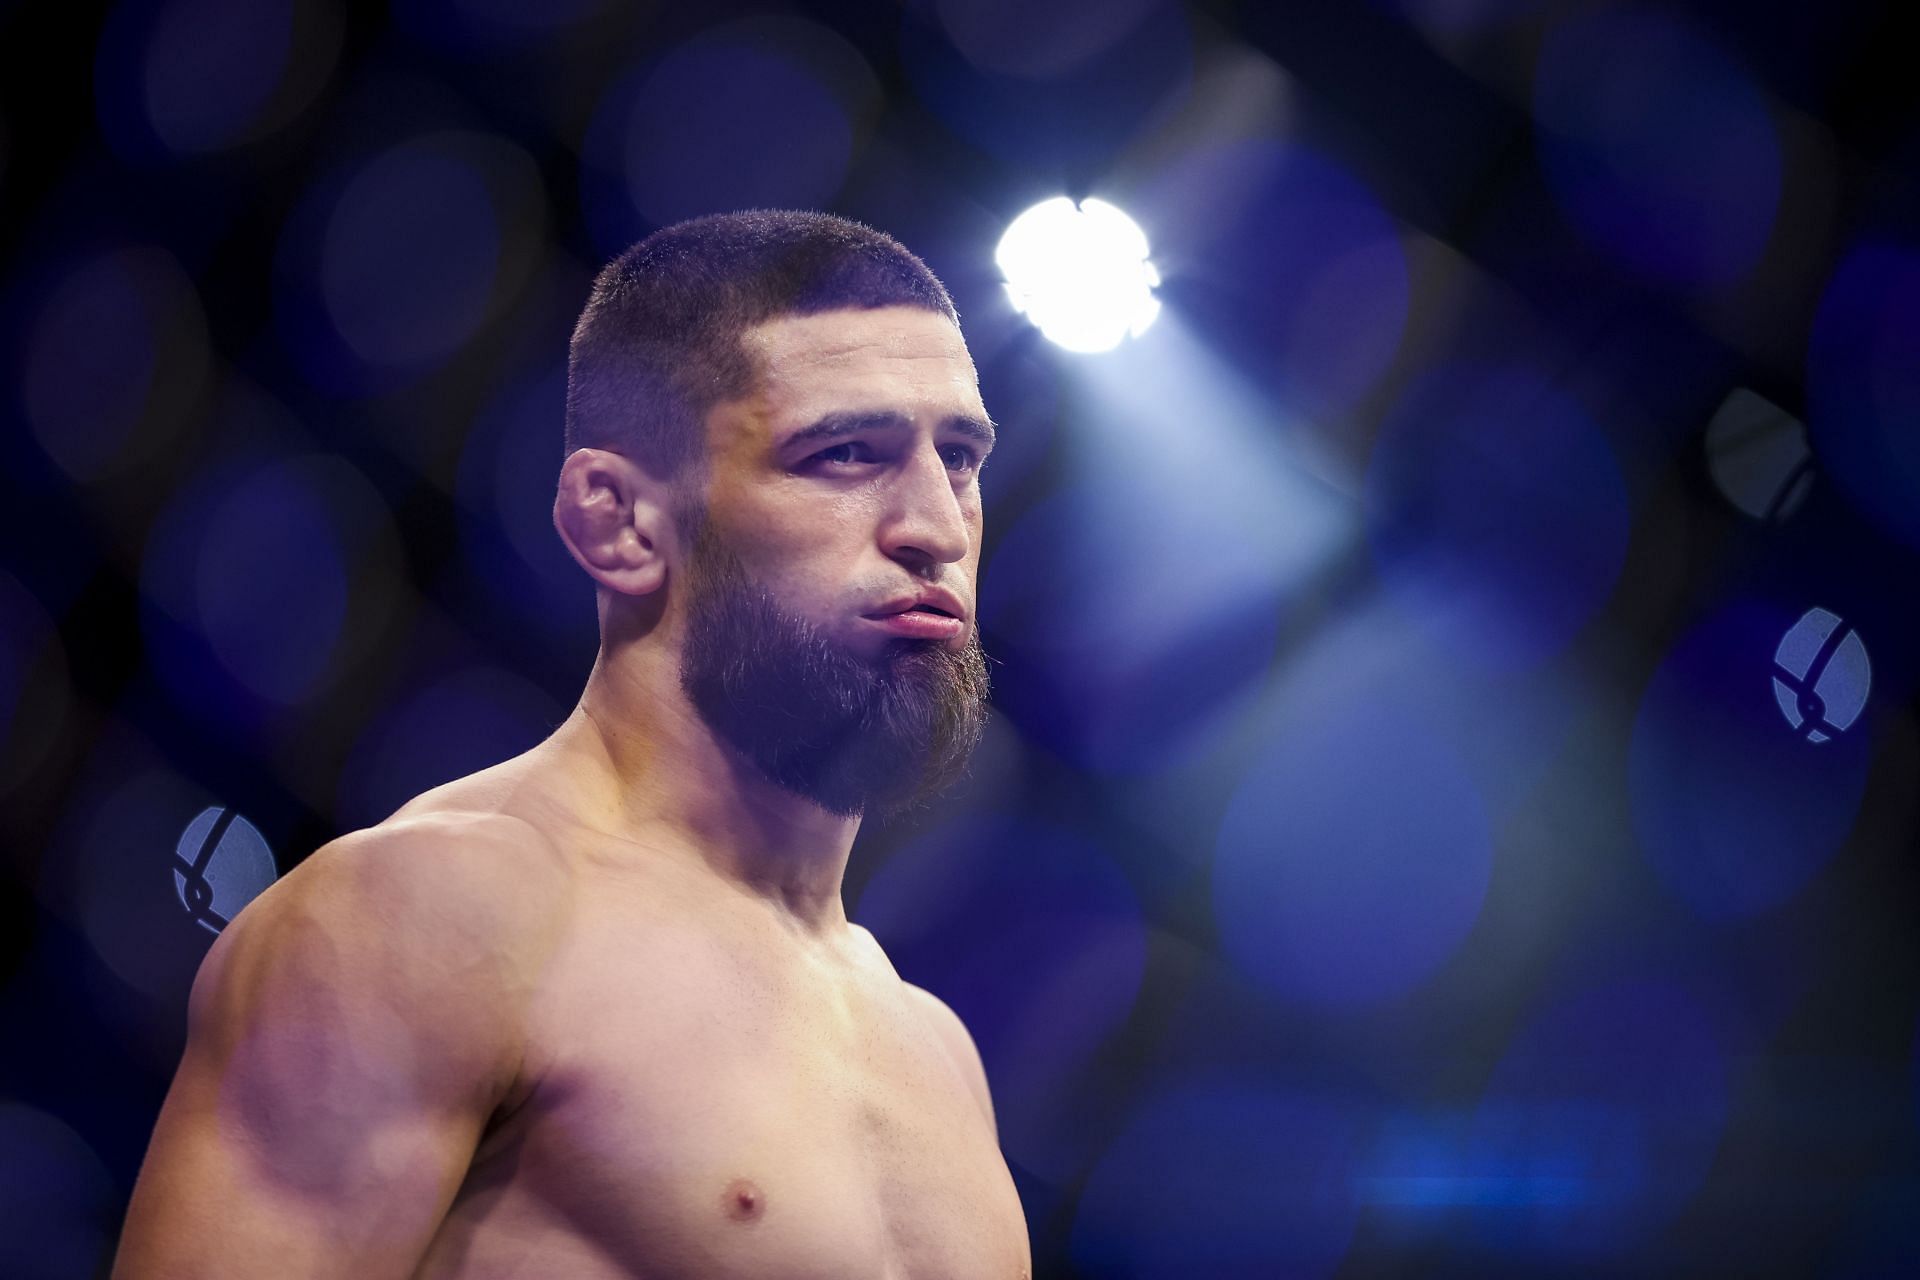 Khamzat Chimaev could end up being the biggest star since Conor McGregor